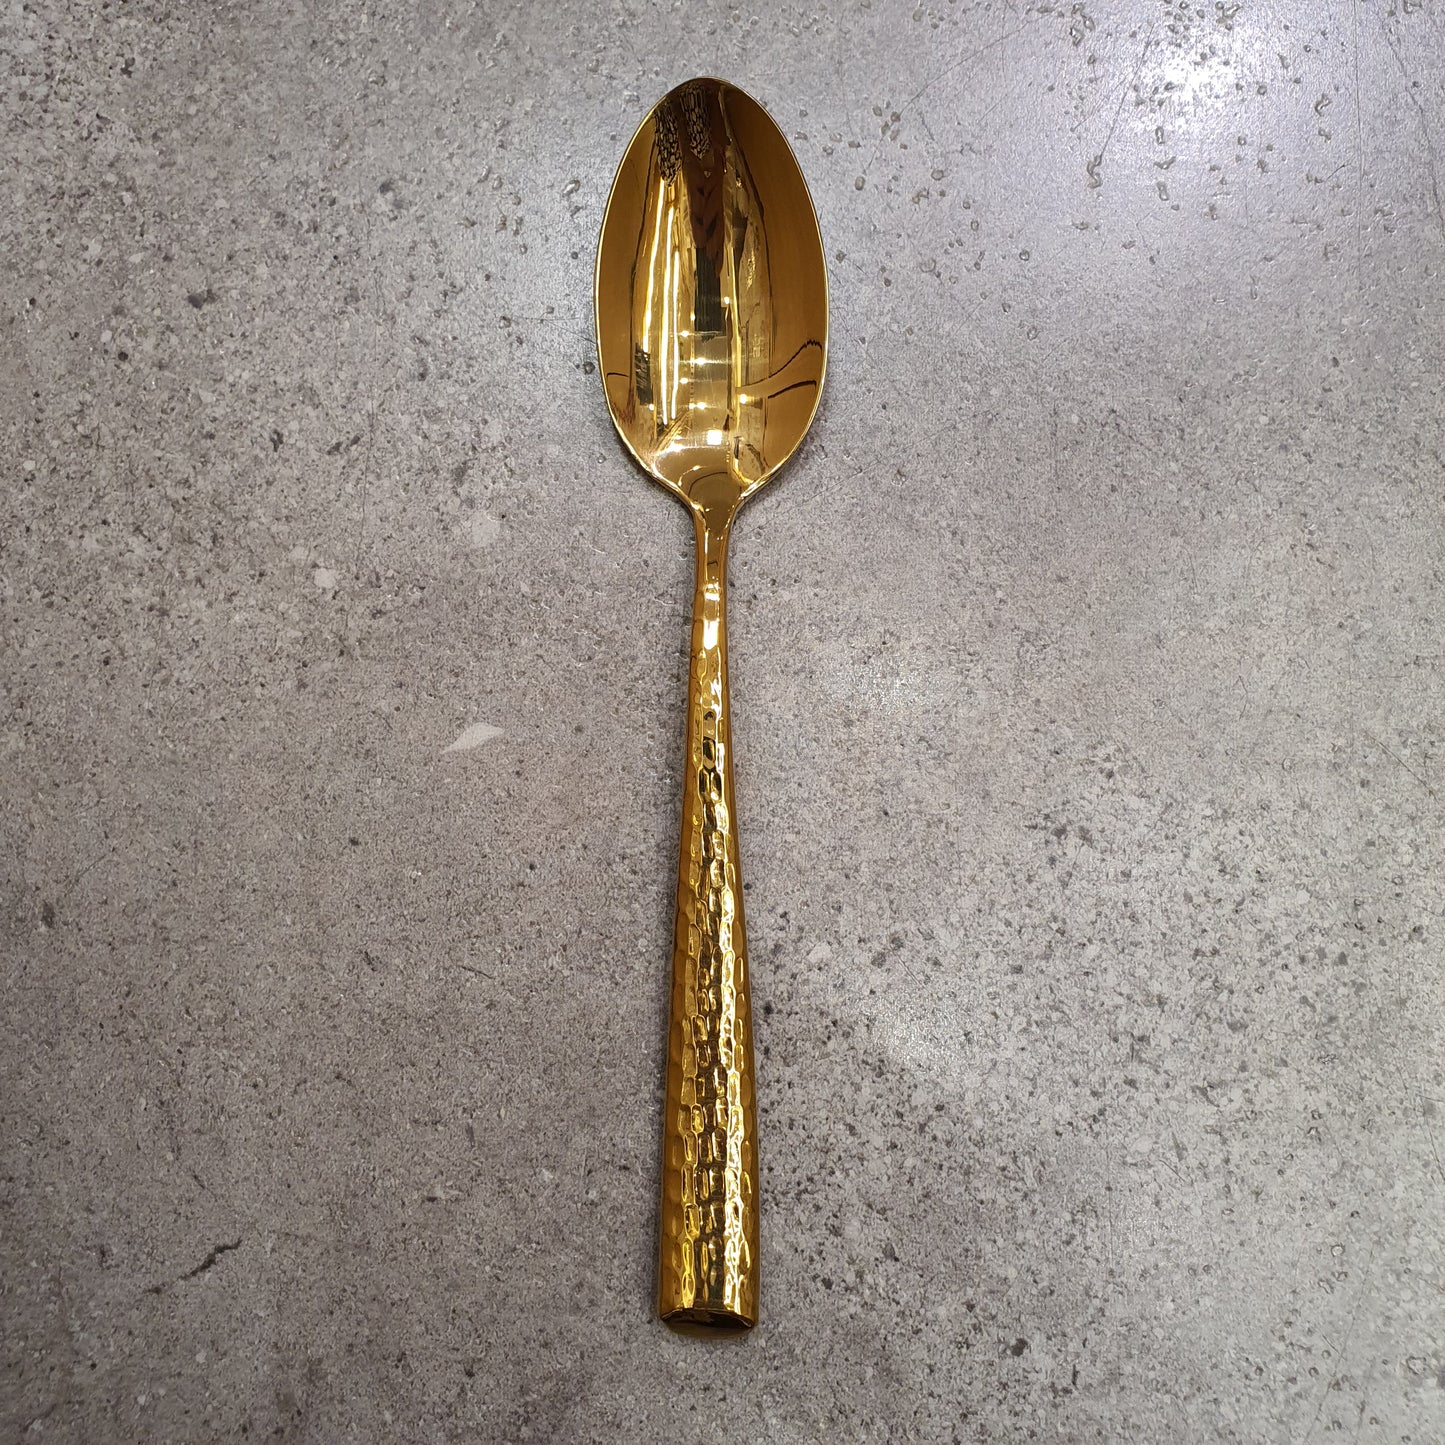 Frontiera Hammered Gold Table Spoon 208mm